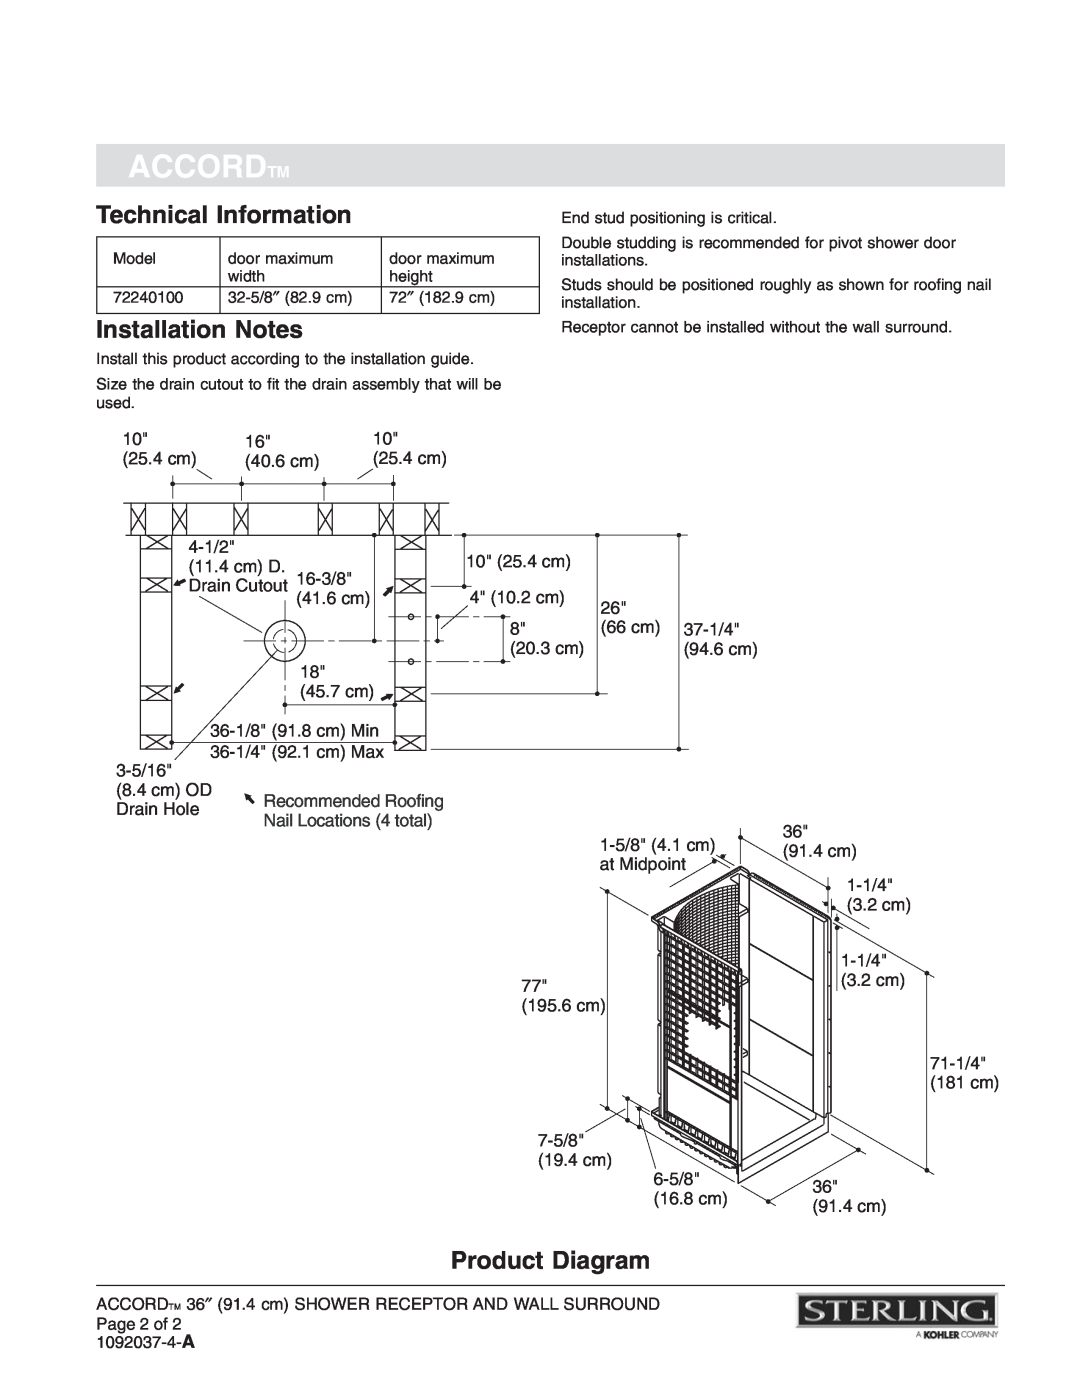 Sterling Plumbing 72240100 warranty Technical Information, Installation Notes, Product Diagram, Accordtm 